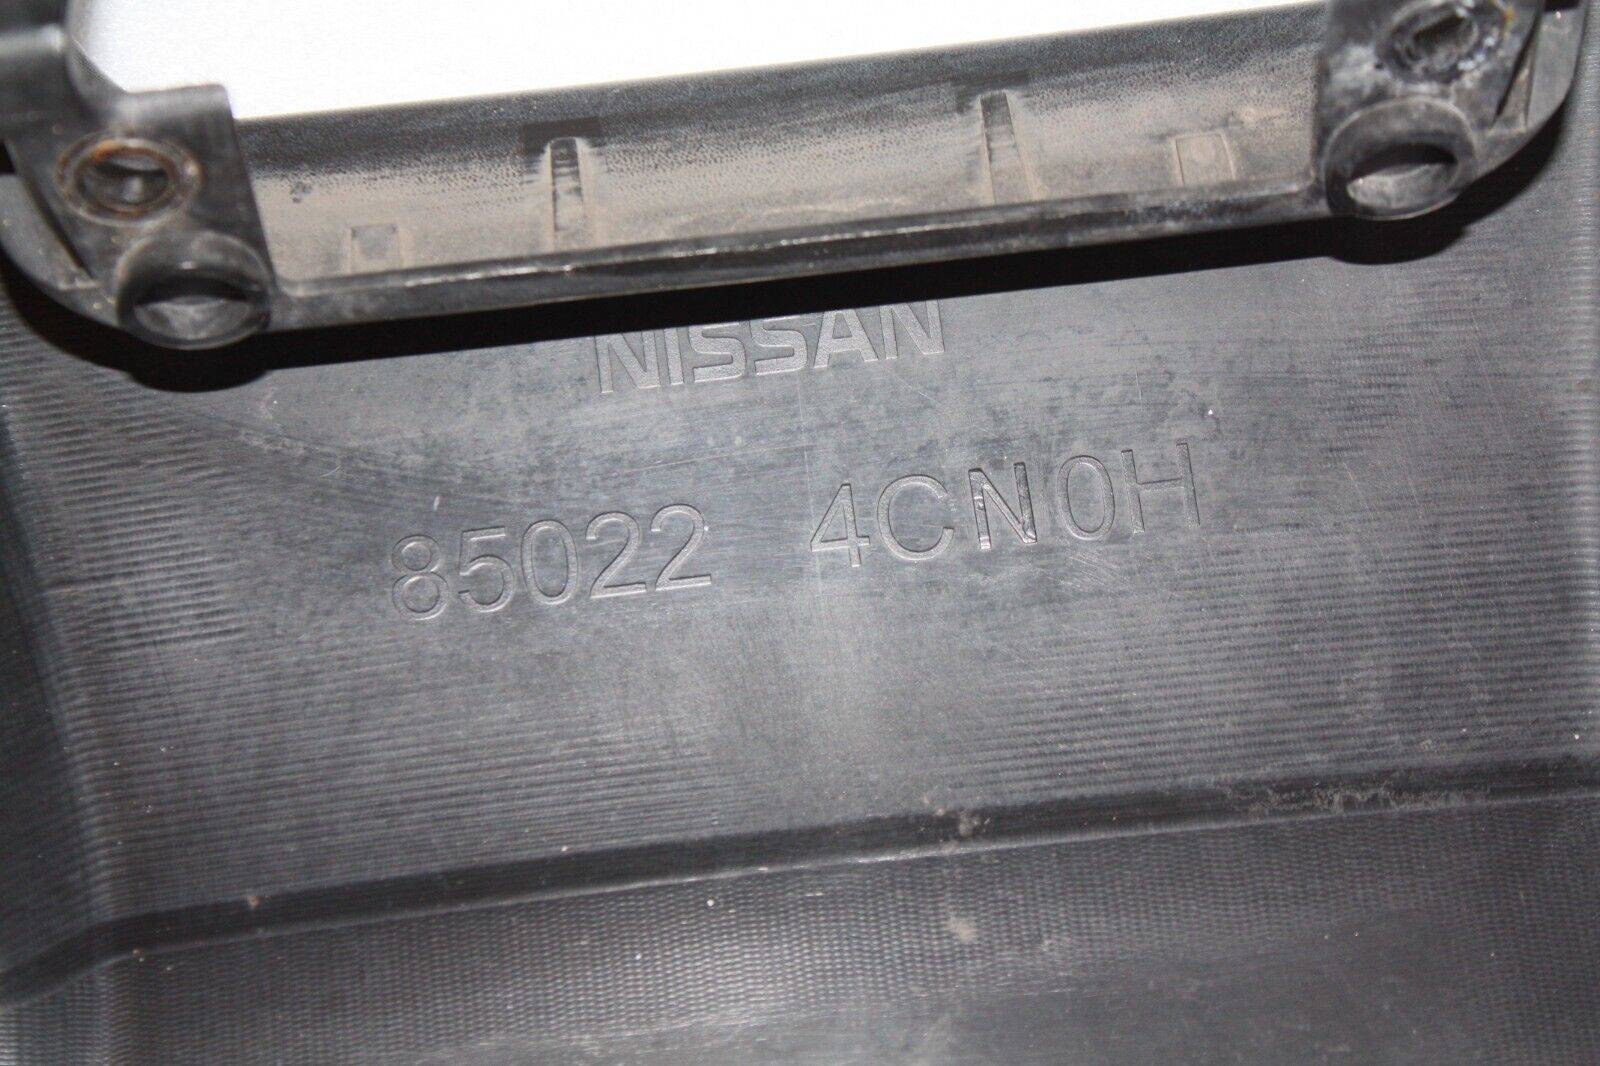 Nissan-X-Trail-Rear-Bumper-2014-TO-2017-85022-4CN0H-Genuine-SEE-PICS-CAREFULLY-176208735051-13